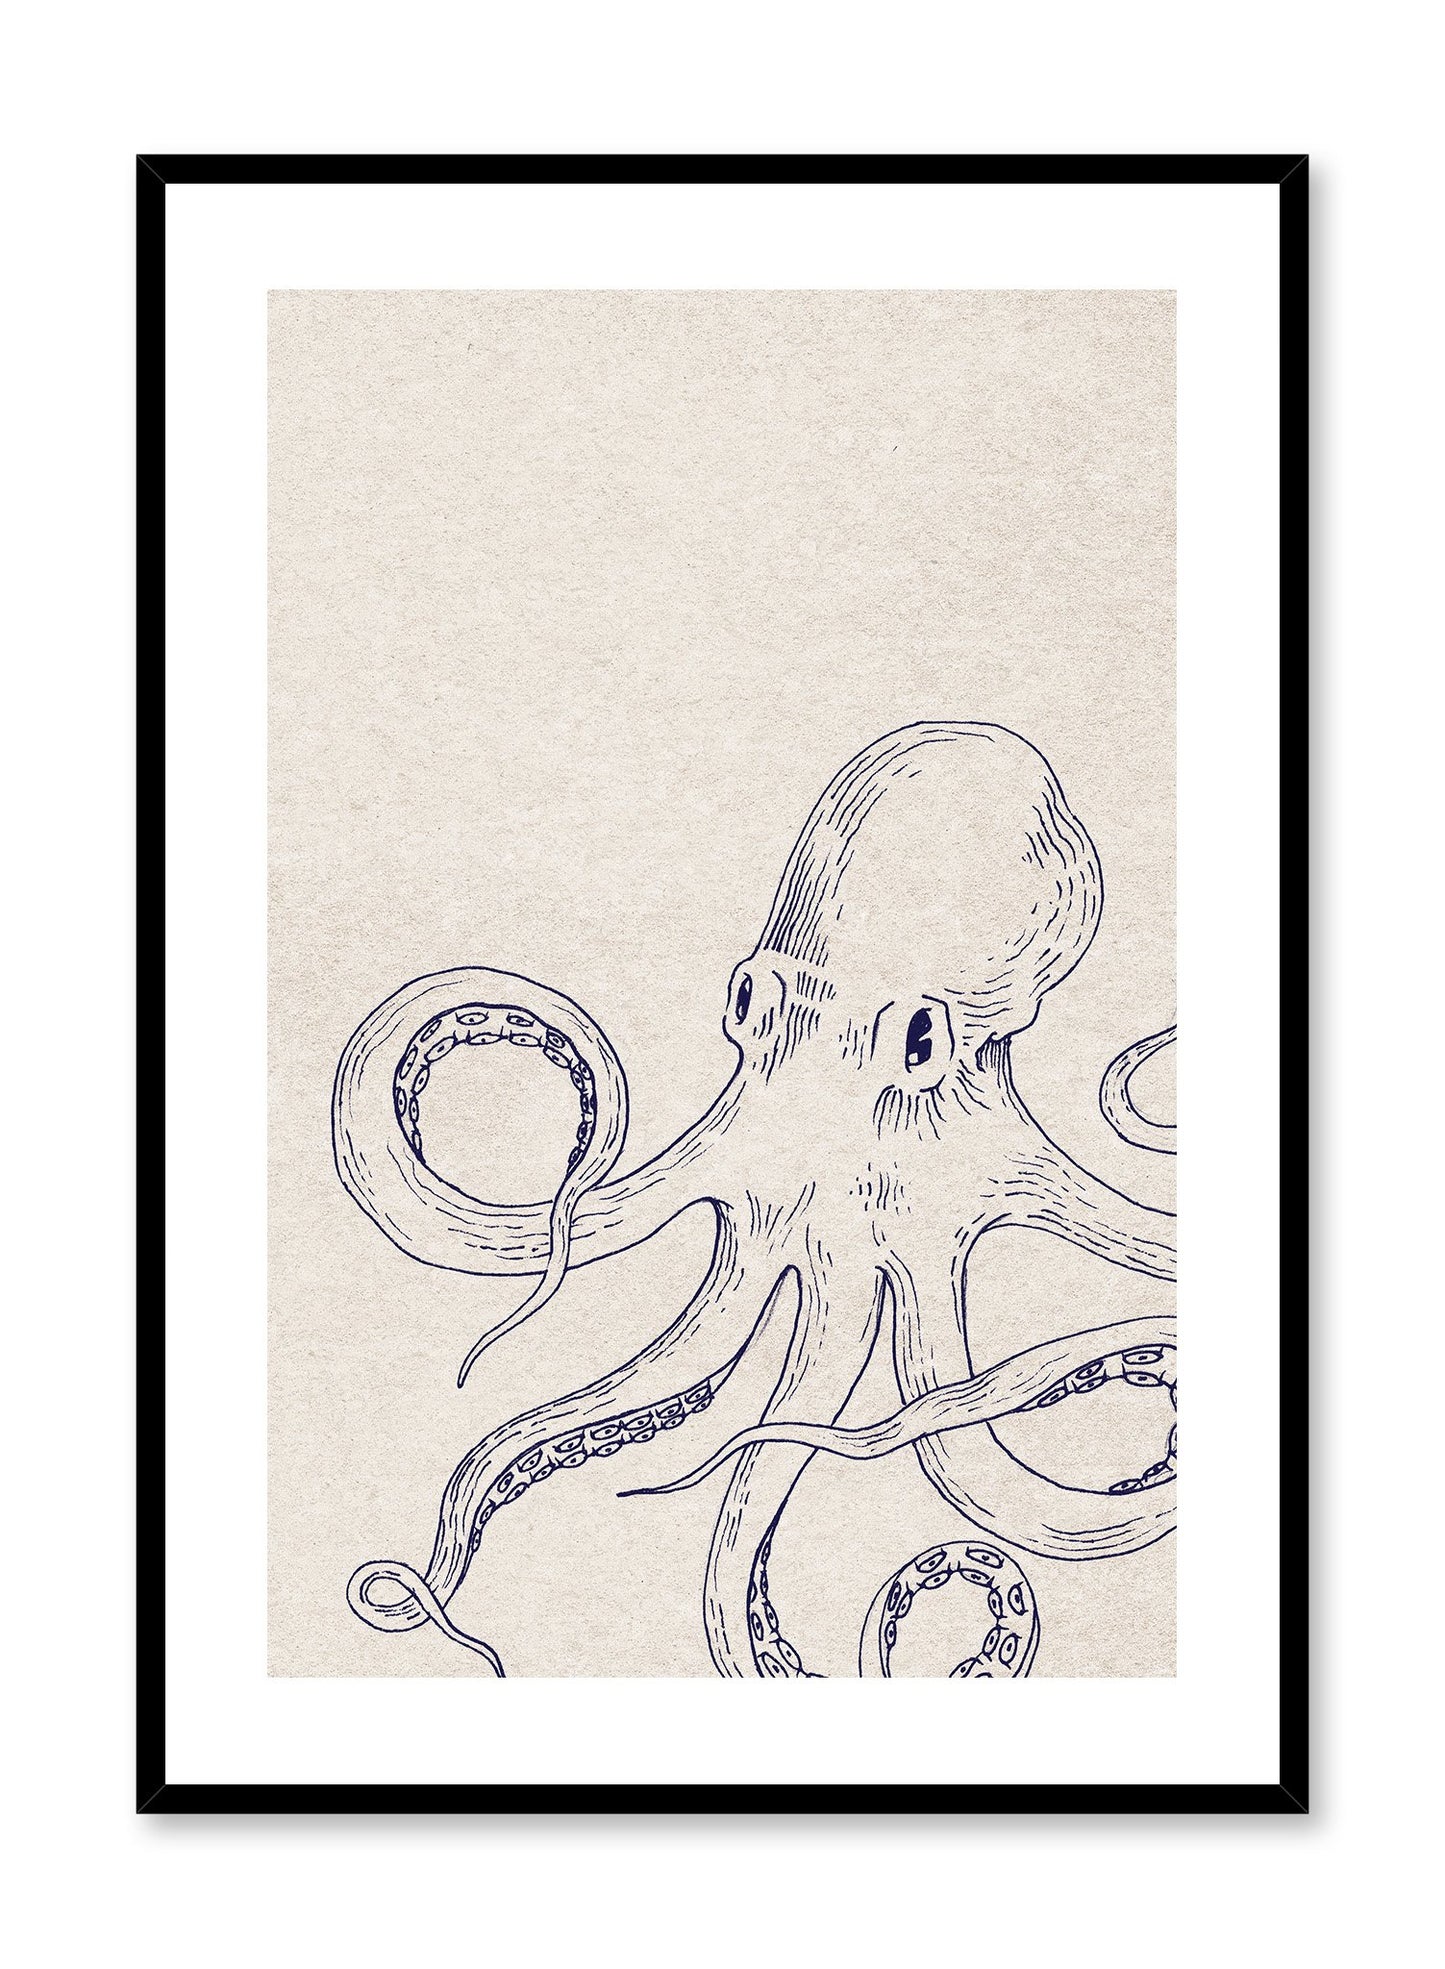 8 Legged Friend is a minimalist illustration of a drawing of a big and mighty octopus with his legs ready to take action by Opposite Wall.